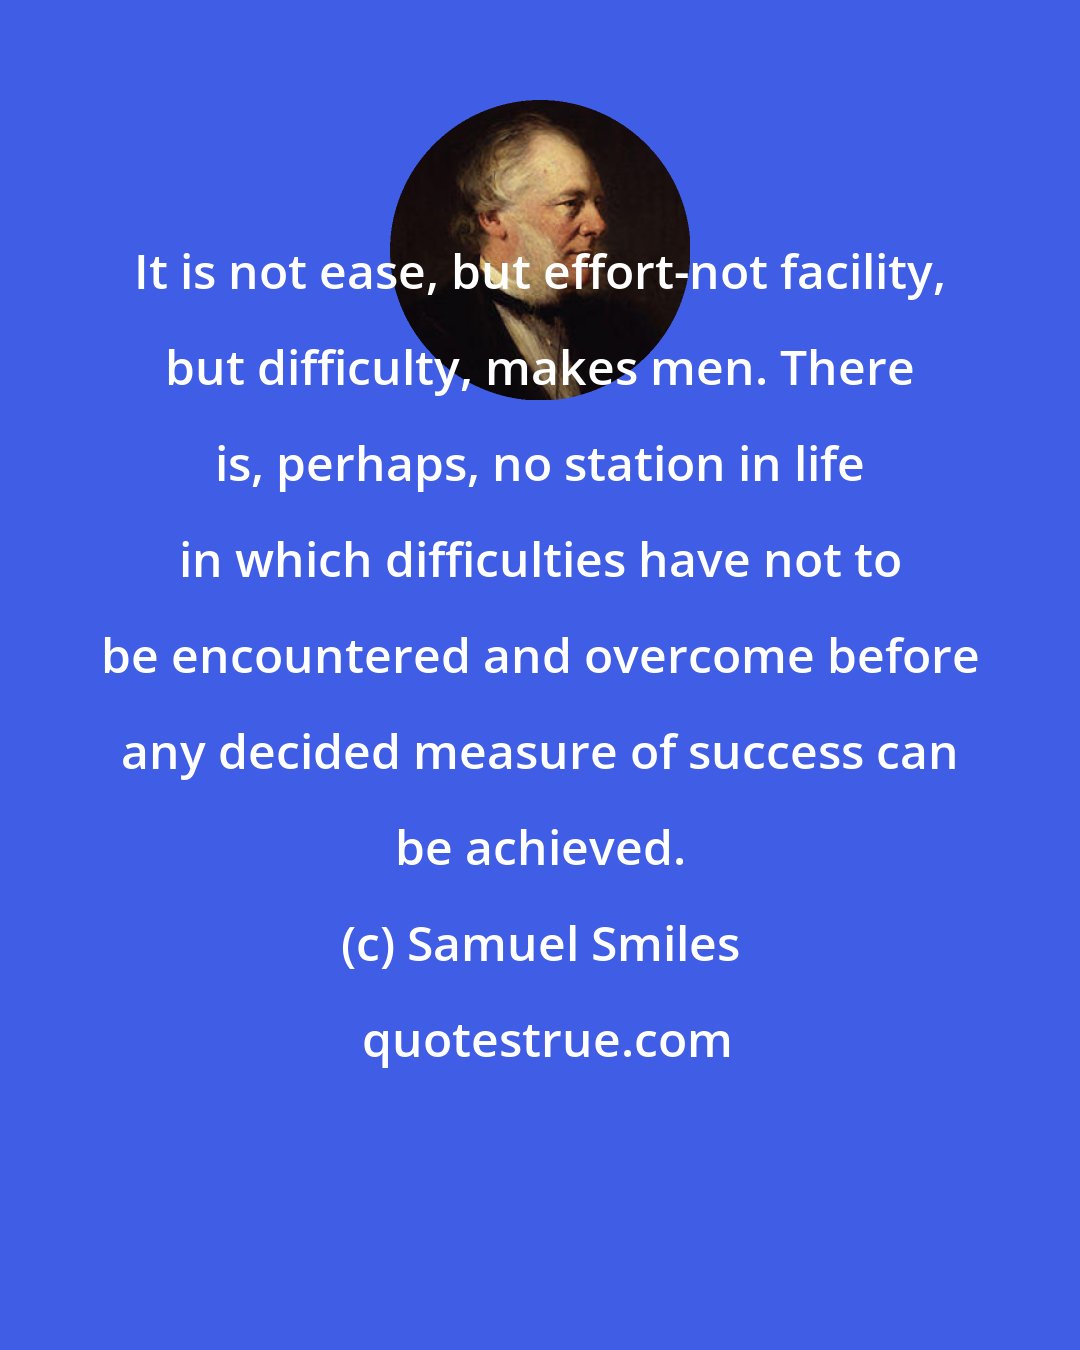 Samuel Smiles: It is not ease, but effort-not facility, but difficulty, makes men. There is, perhaps, no station in life in which difficulties have not to be encountered and overcome before any decided measure of success can be achieved.